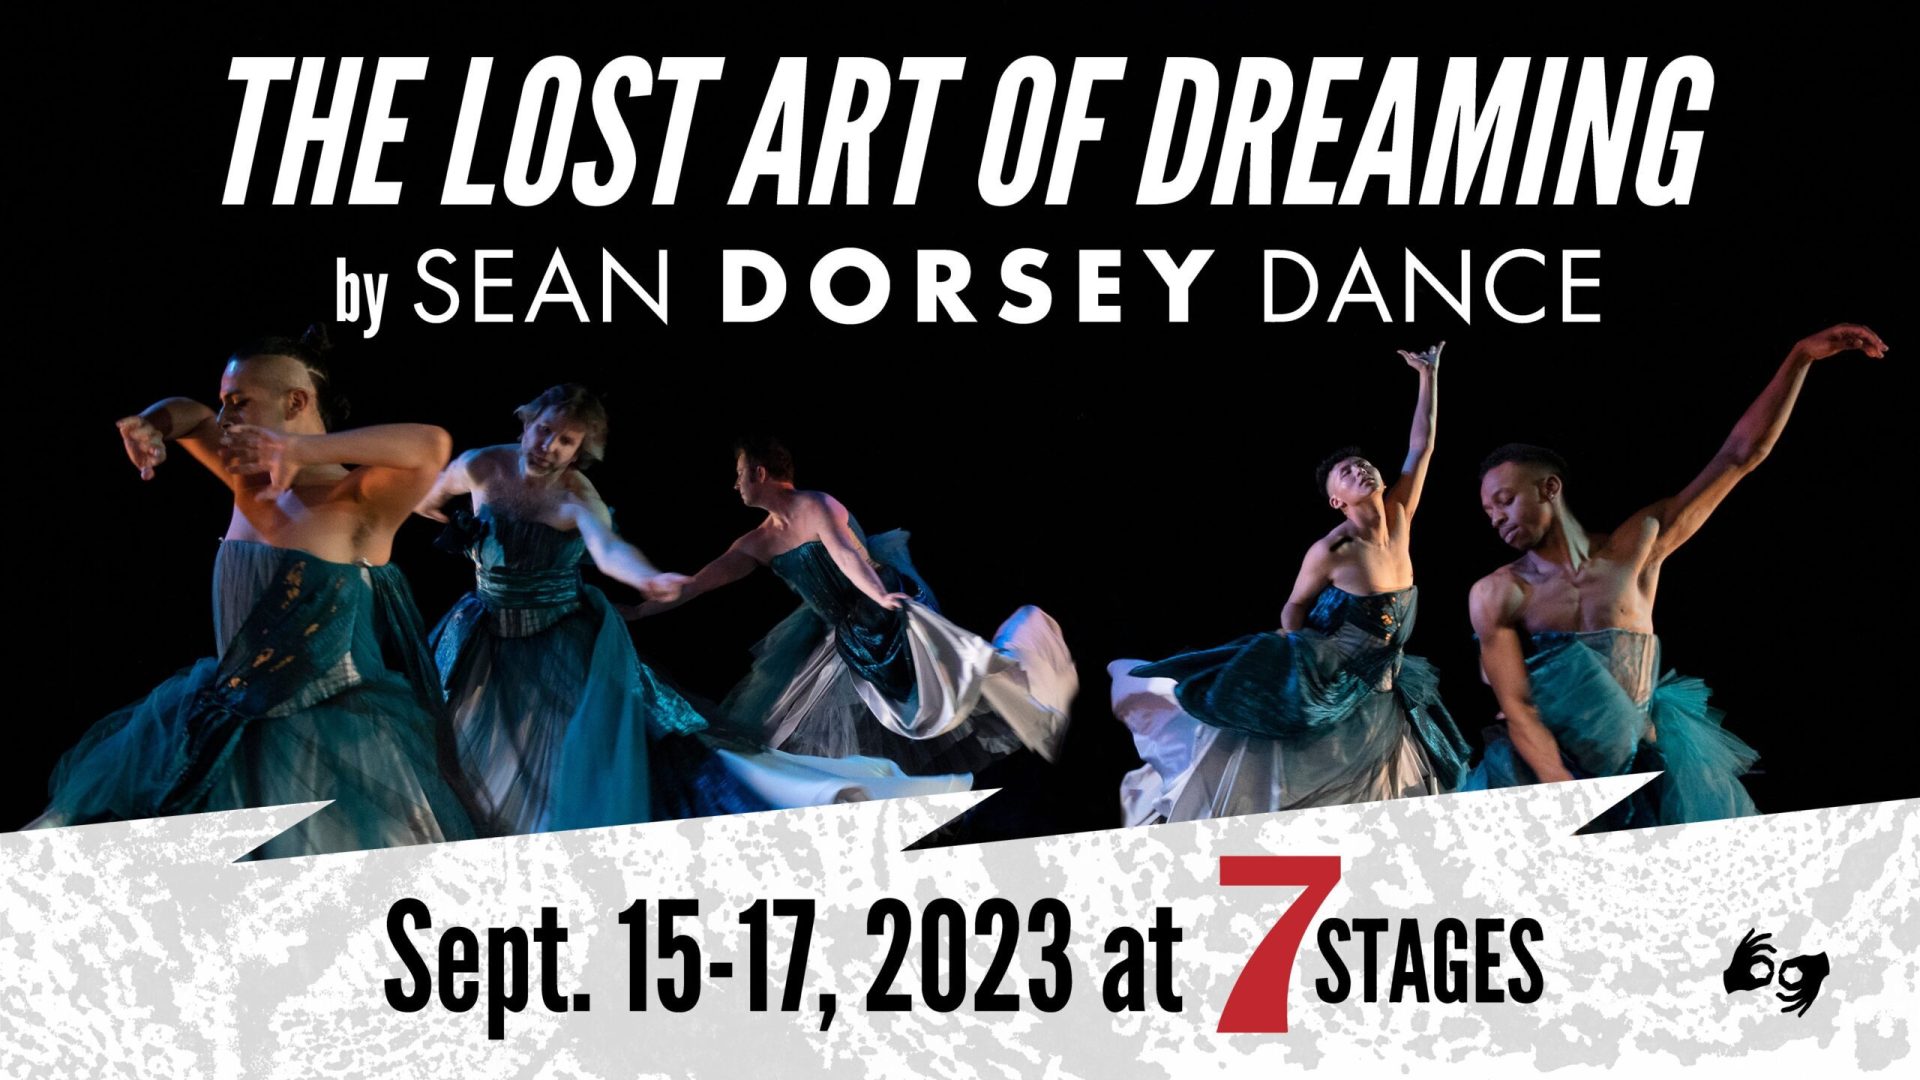 The Lost Art of Dreaming by Sean Dorsey Dance. September 15 through 17, 2023 at 7 Stages